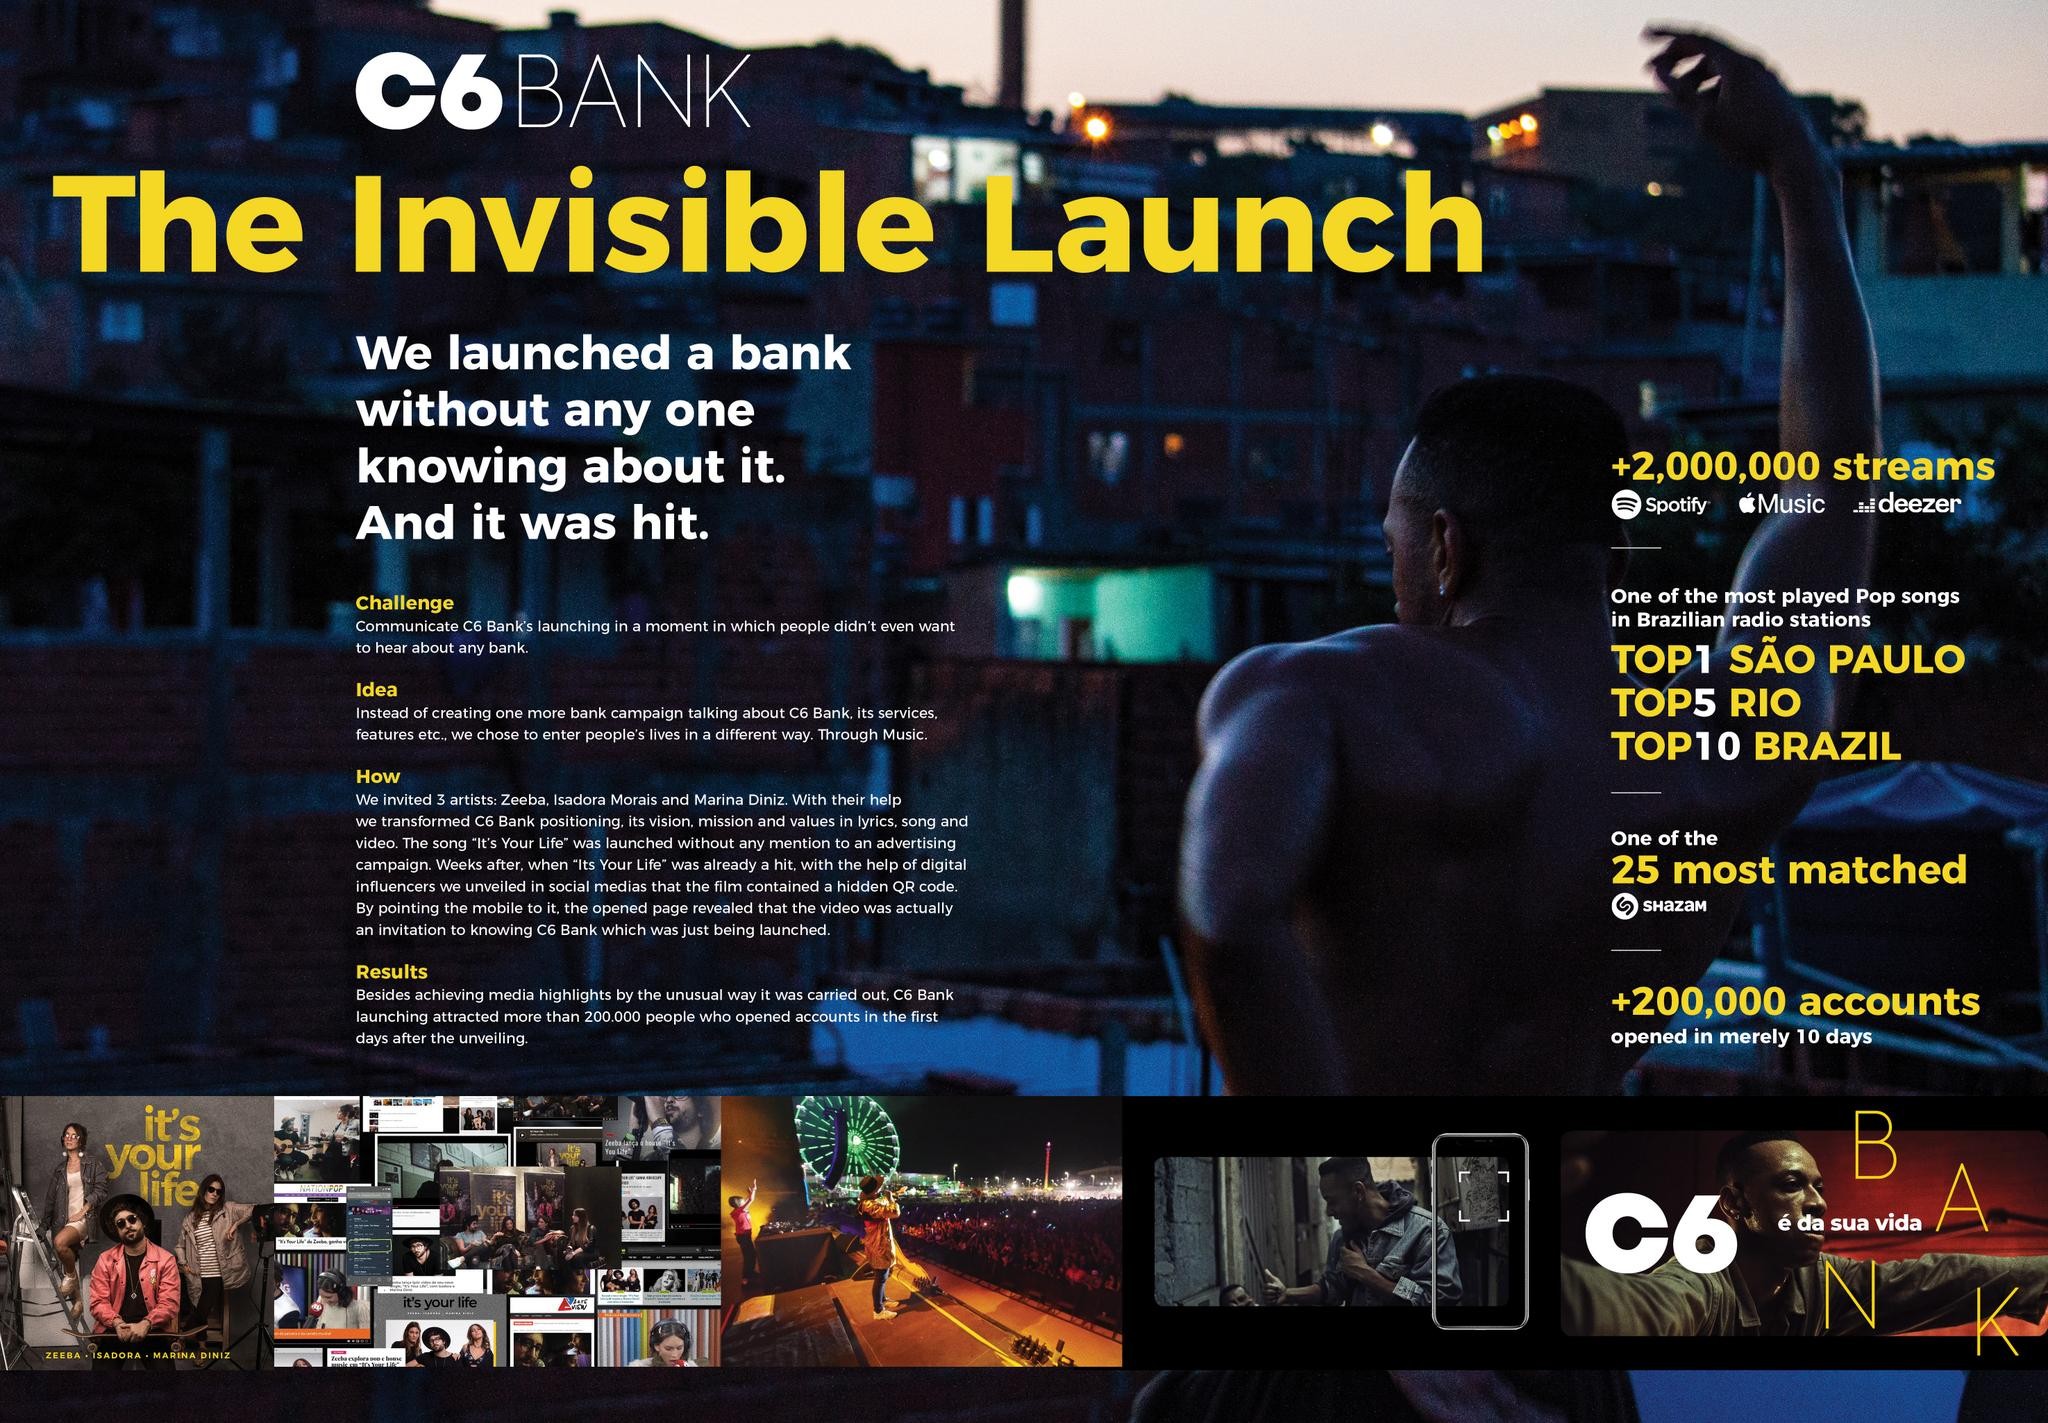 THE INVISIBLE LAUNCH